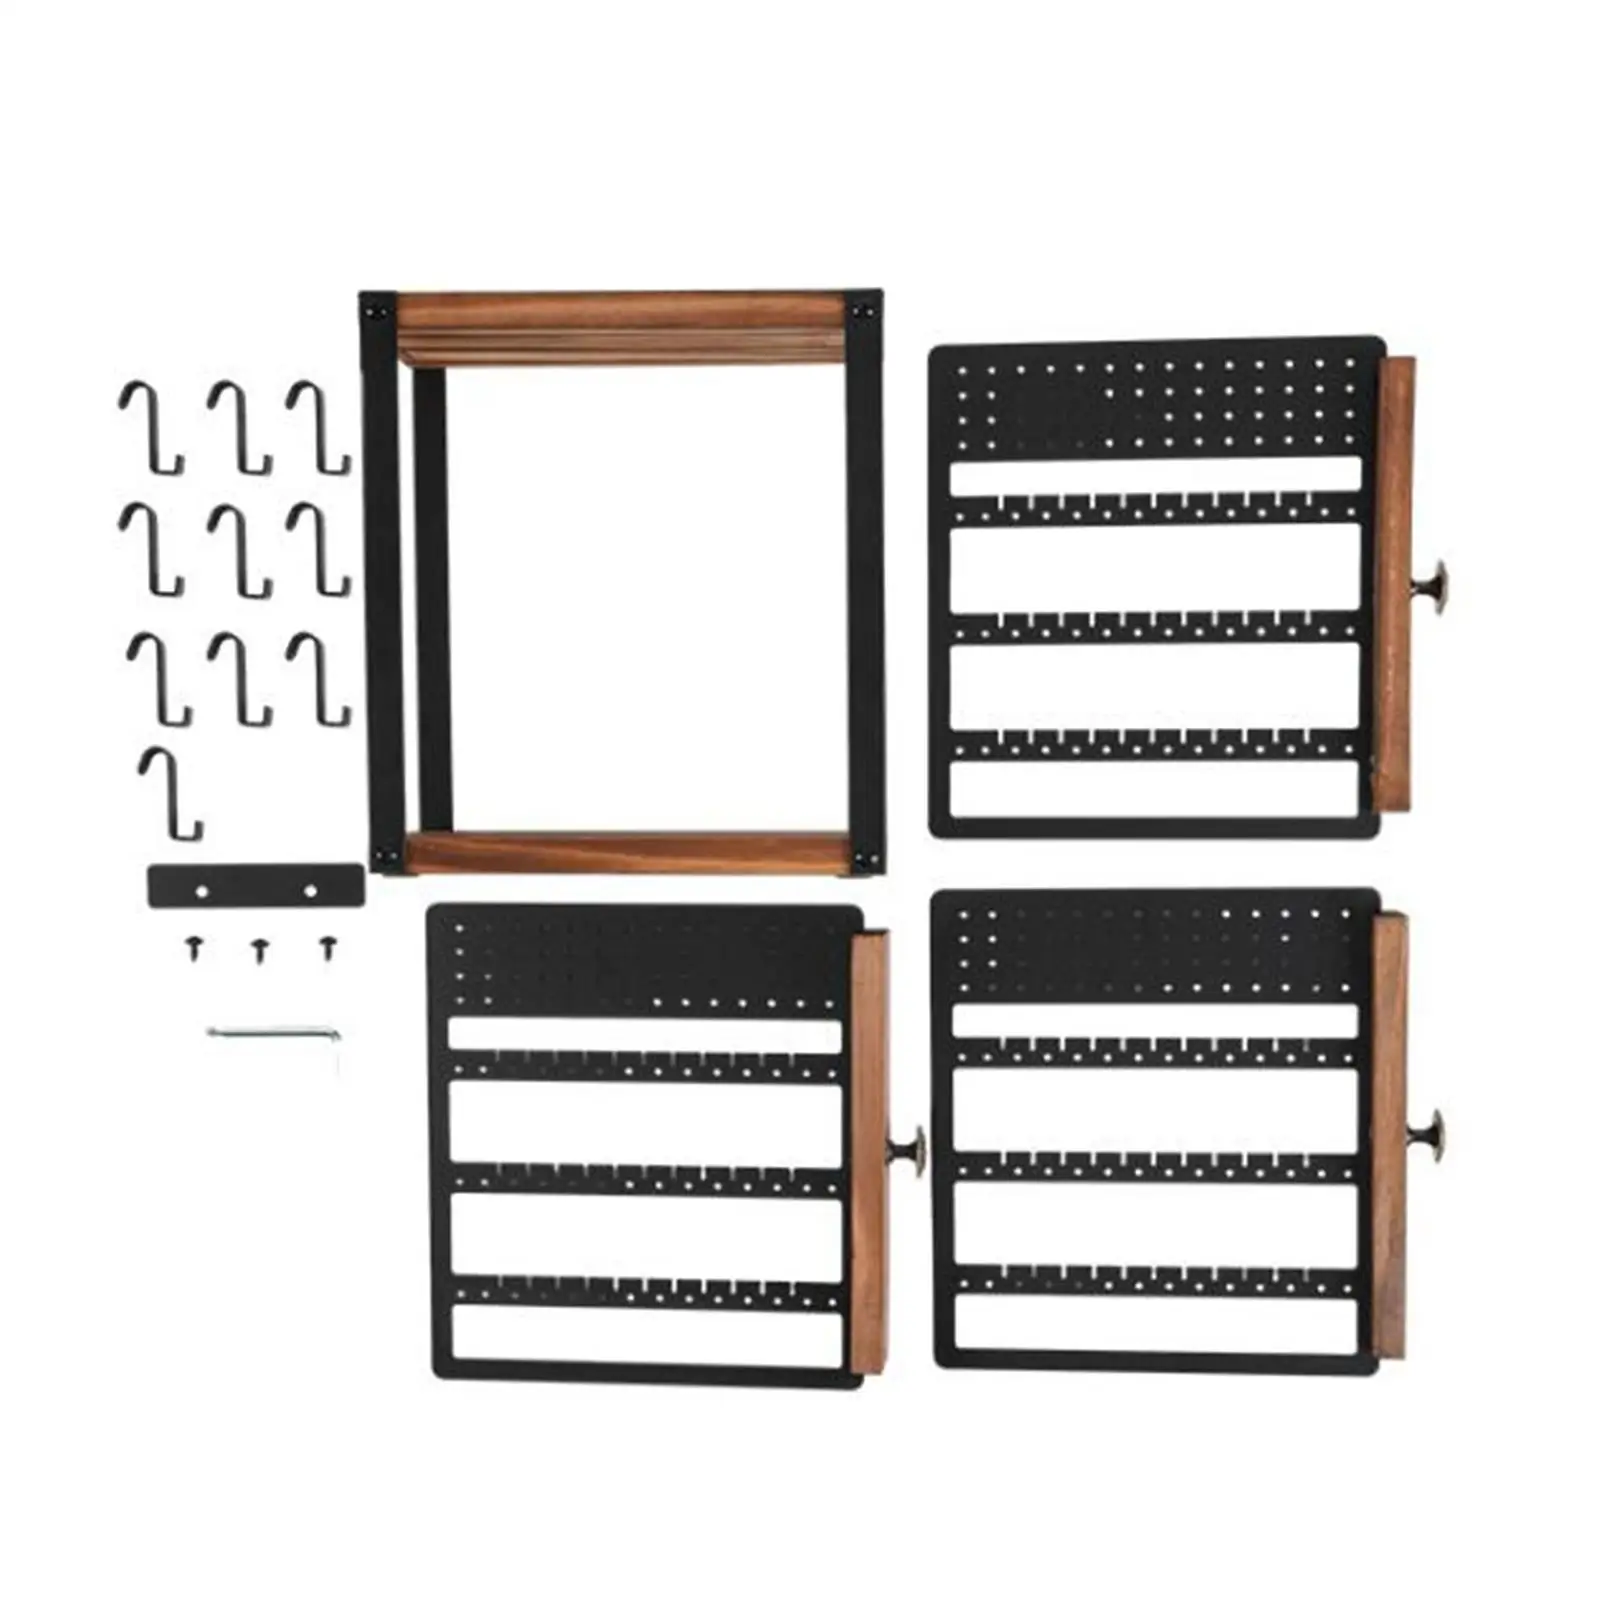 Jewelry Display Stand Slide Out Panels Desktop Rings Jewelry Holder for Shop Shopping Mall Dresser Photography Live Broadcasting